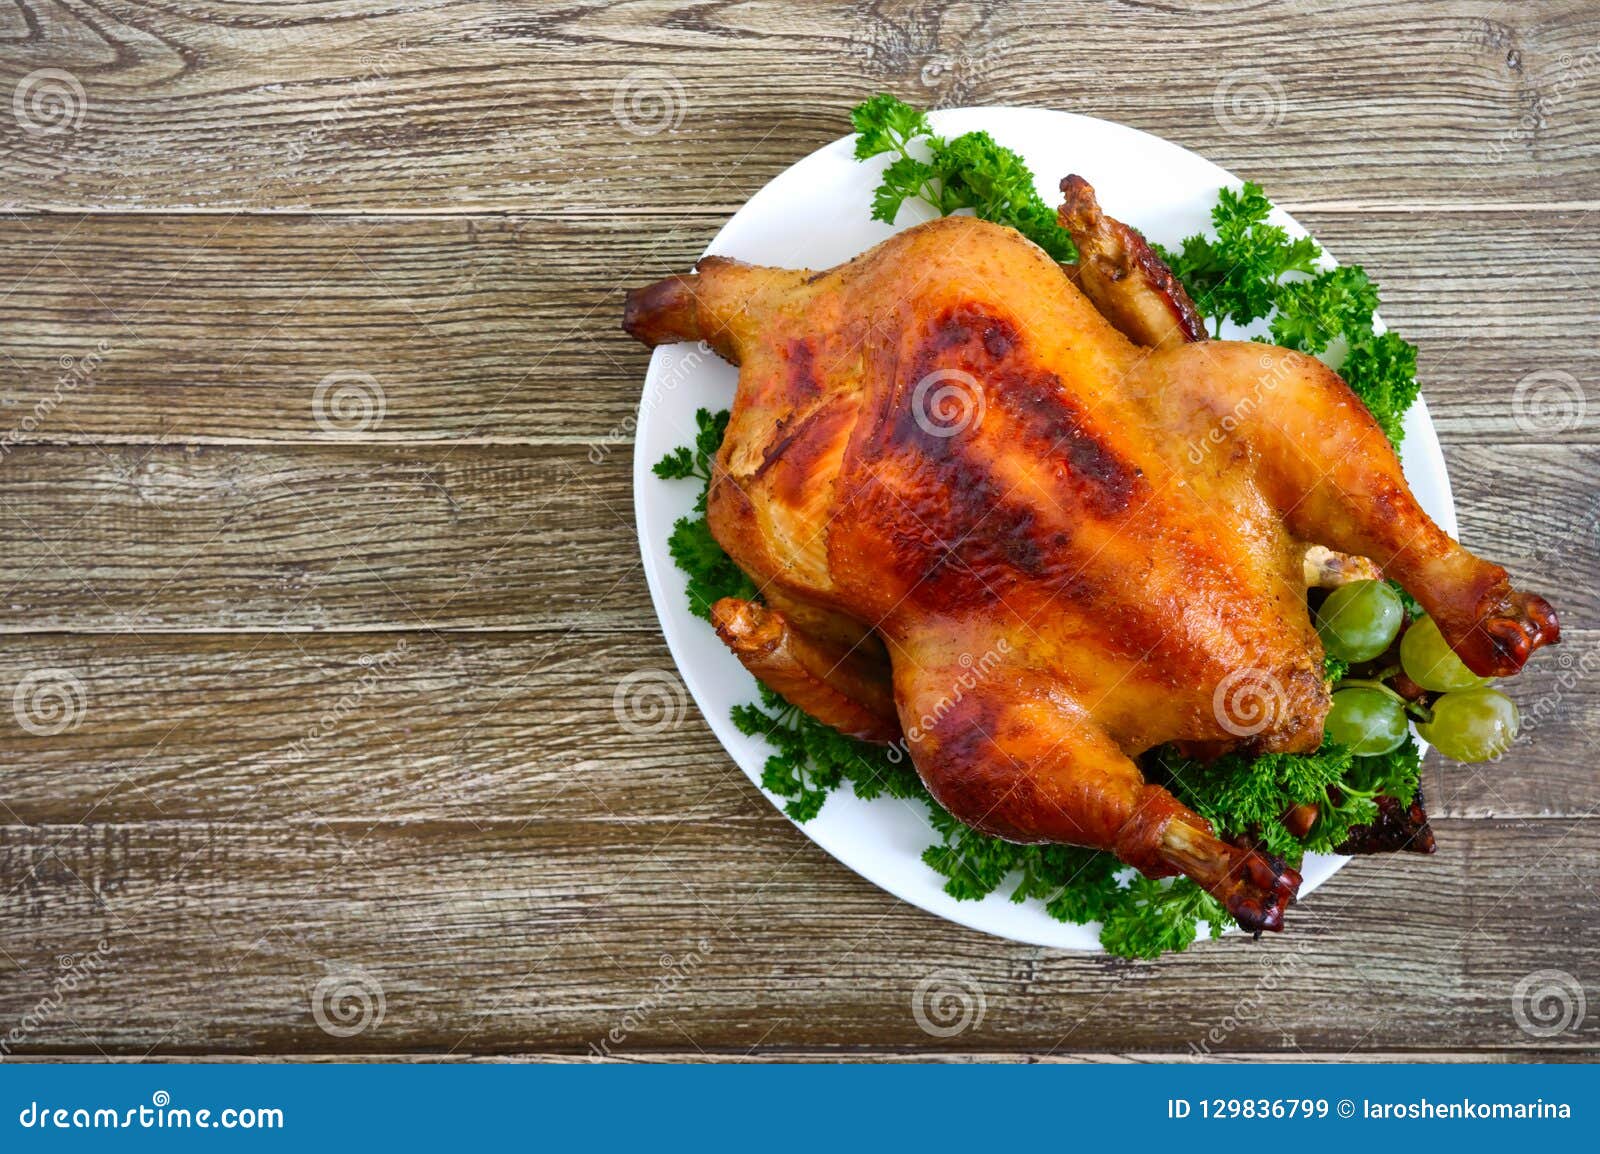 Traditional Dish Turkey on the Holiday Table. Festive Dinner for ...